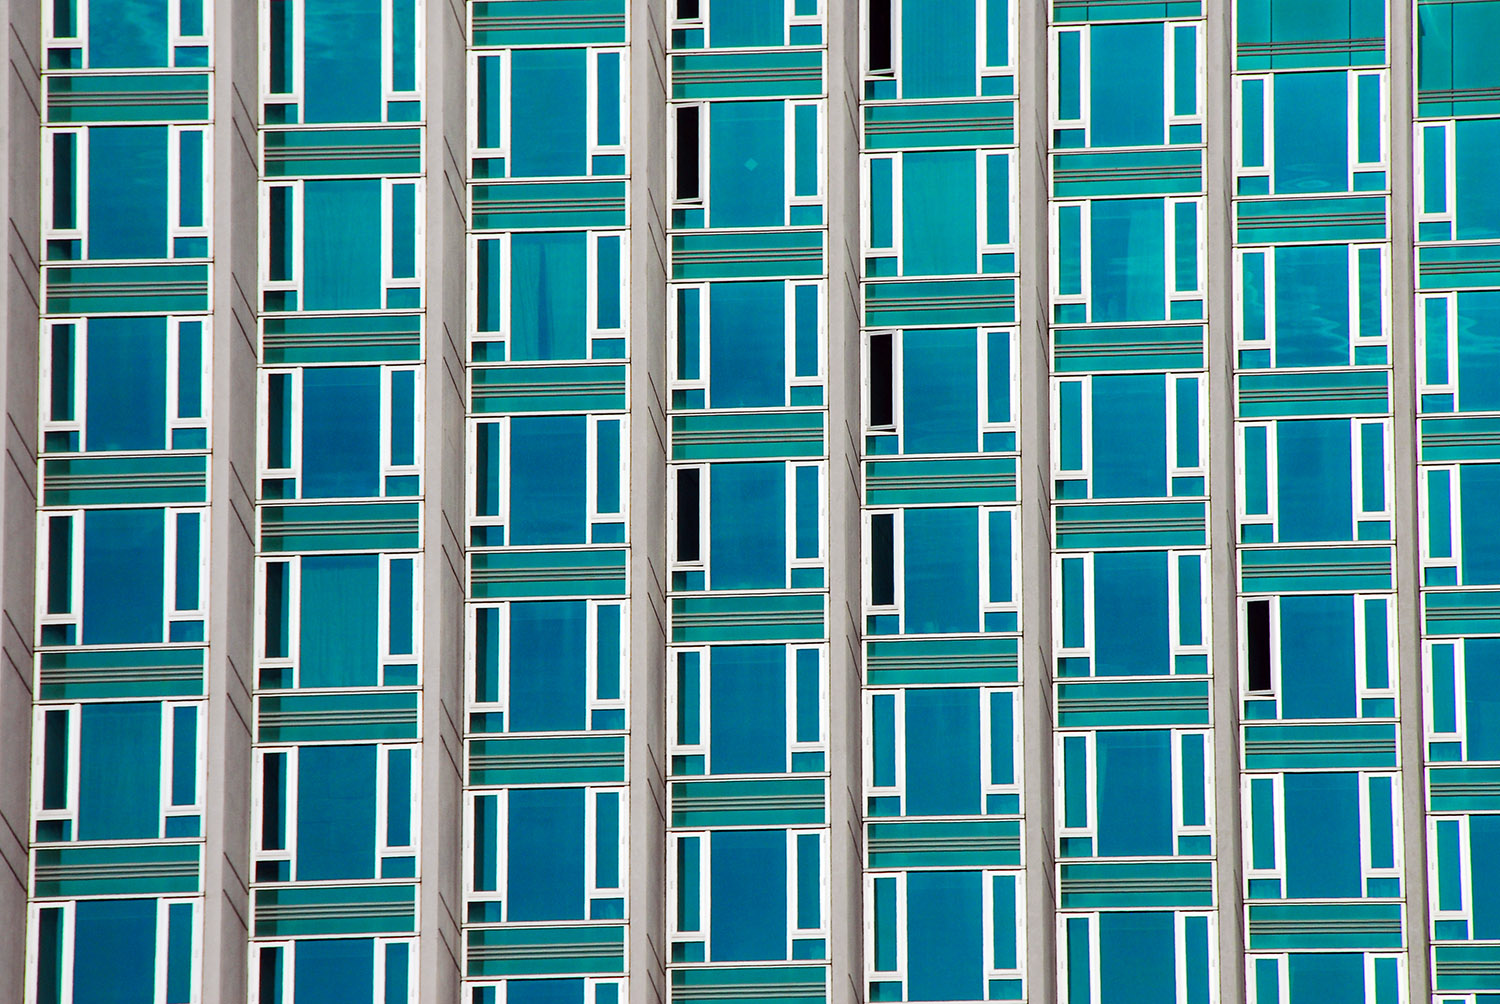 Architecture_Building_Patterns_Turquoise_New_York_City.jpg